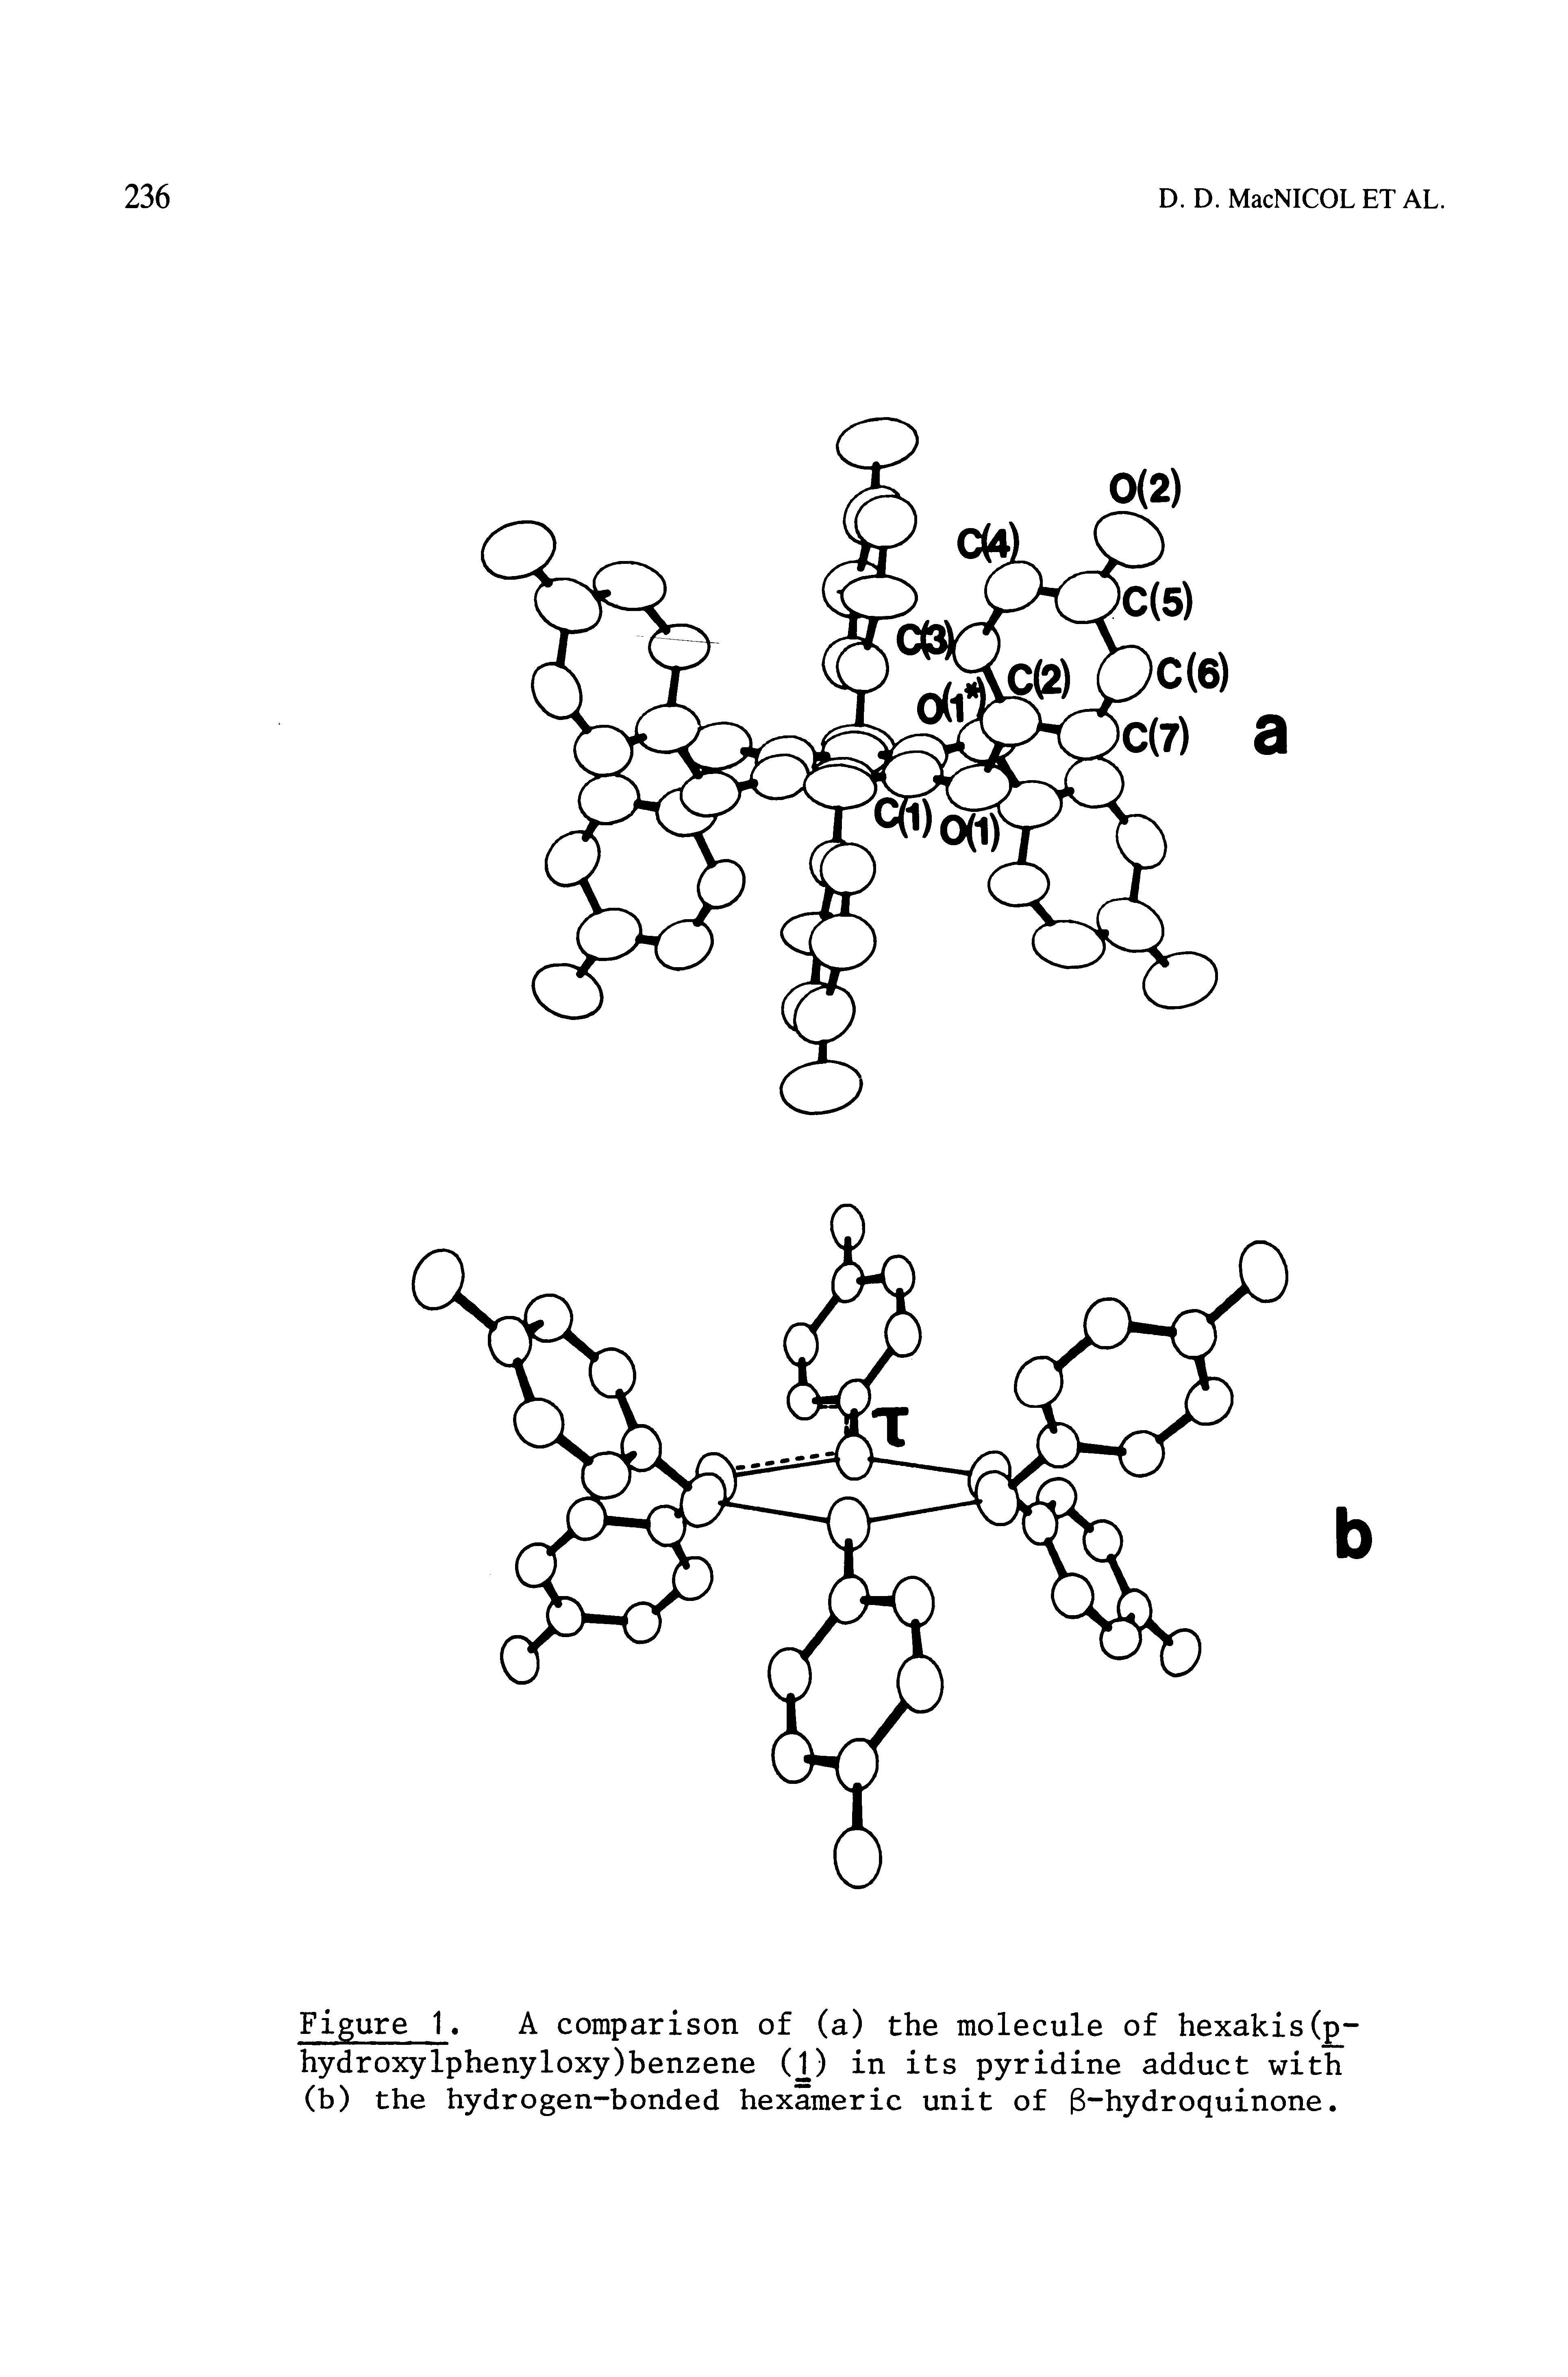 Figure 1. A comparison of (a) the molecule of hexakis( -hydroxylphenyloxy)benzene (2) in its pyridine adduct with (b) the hydrogen-bonded hexameric unit of g-hydroquinone.